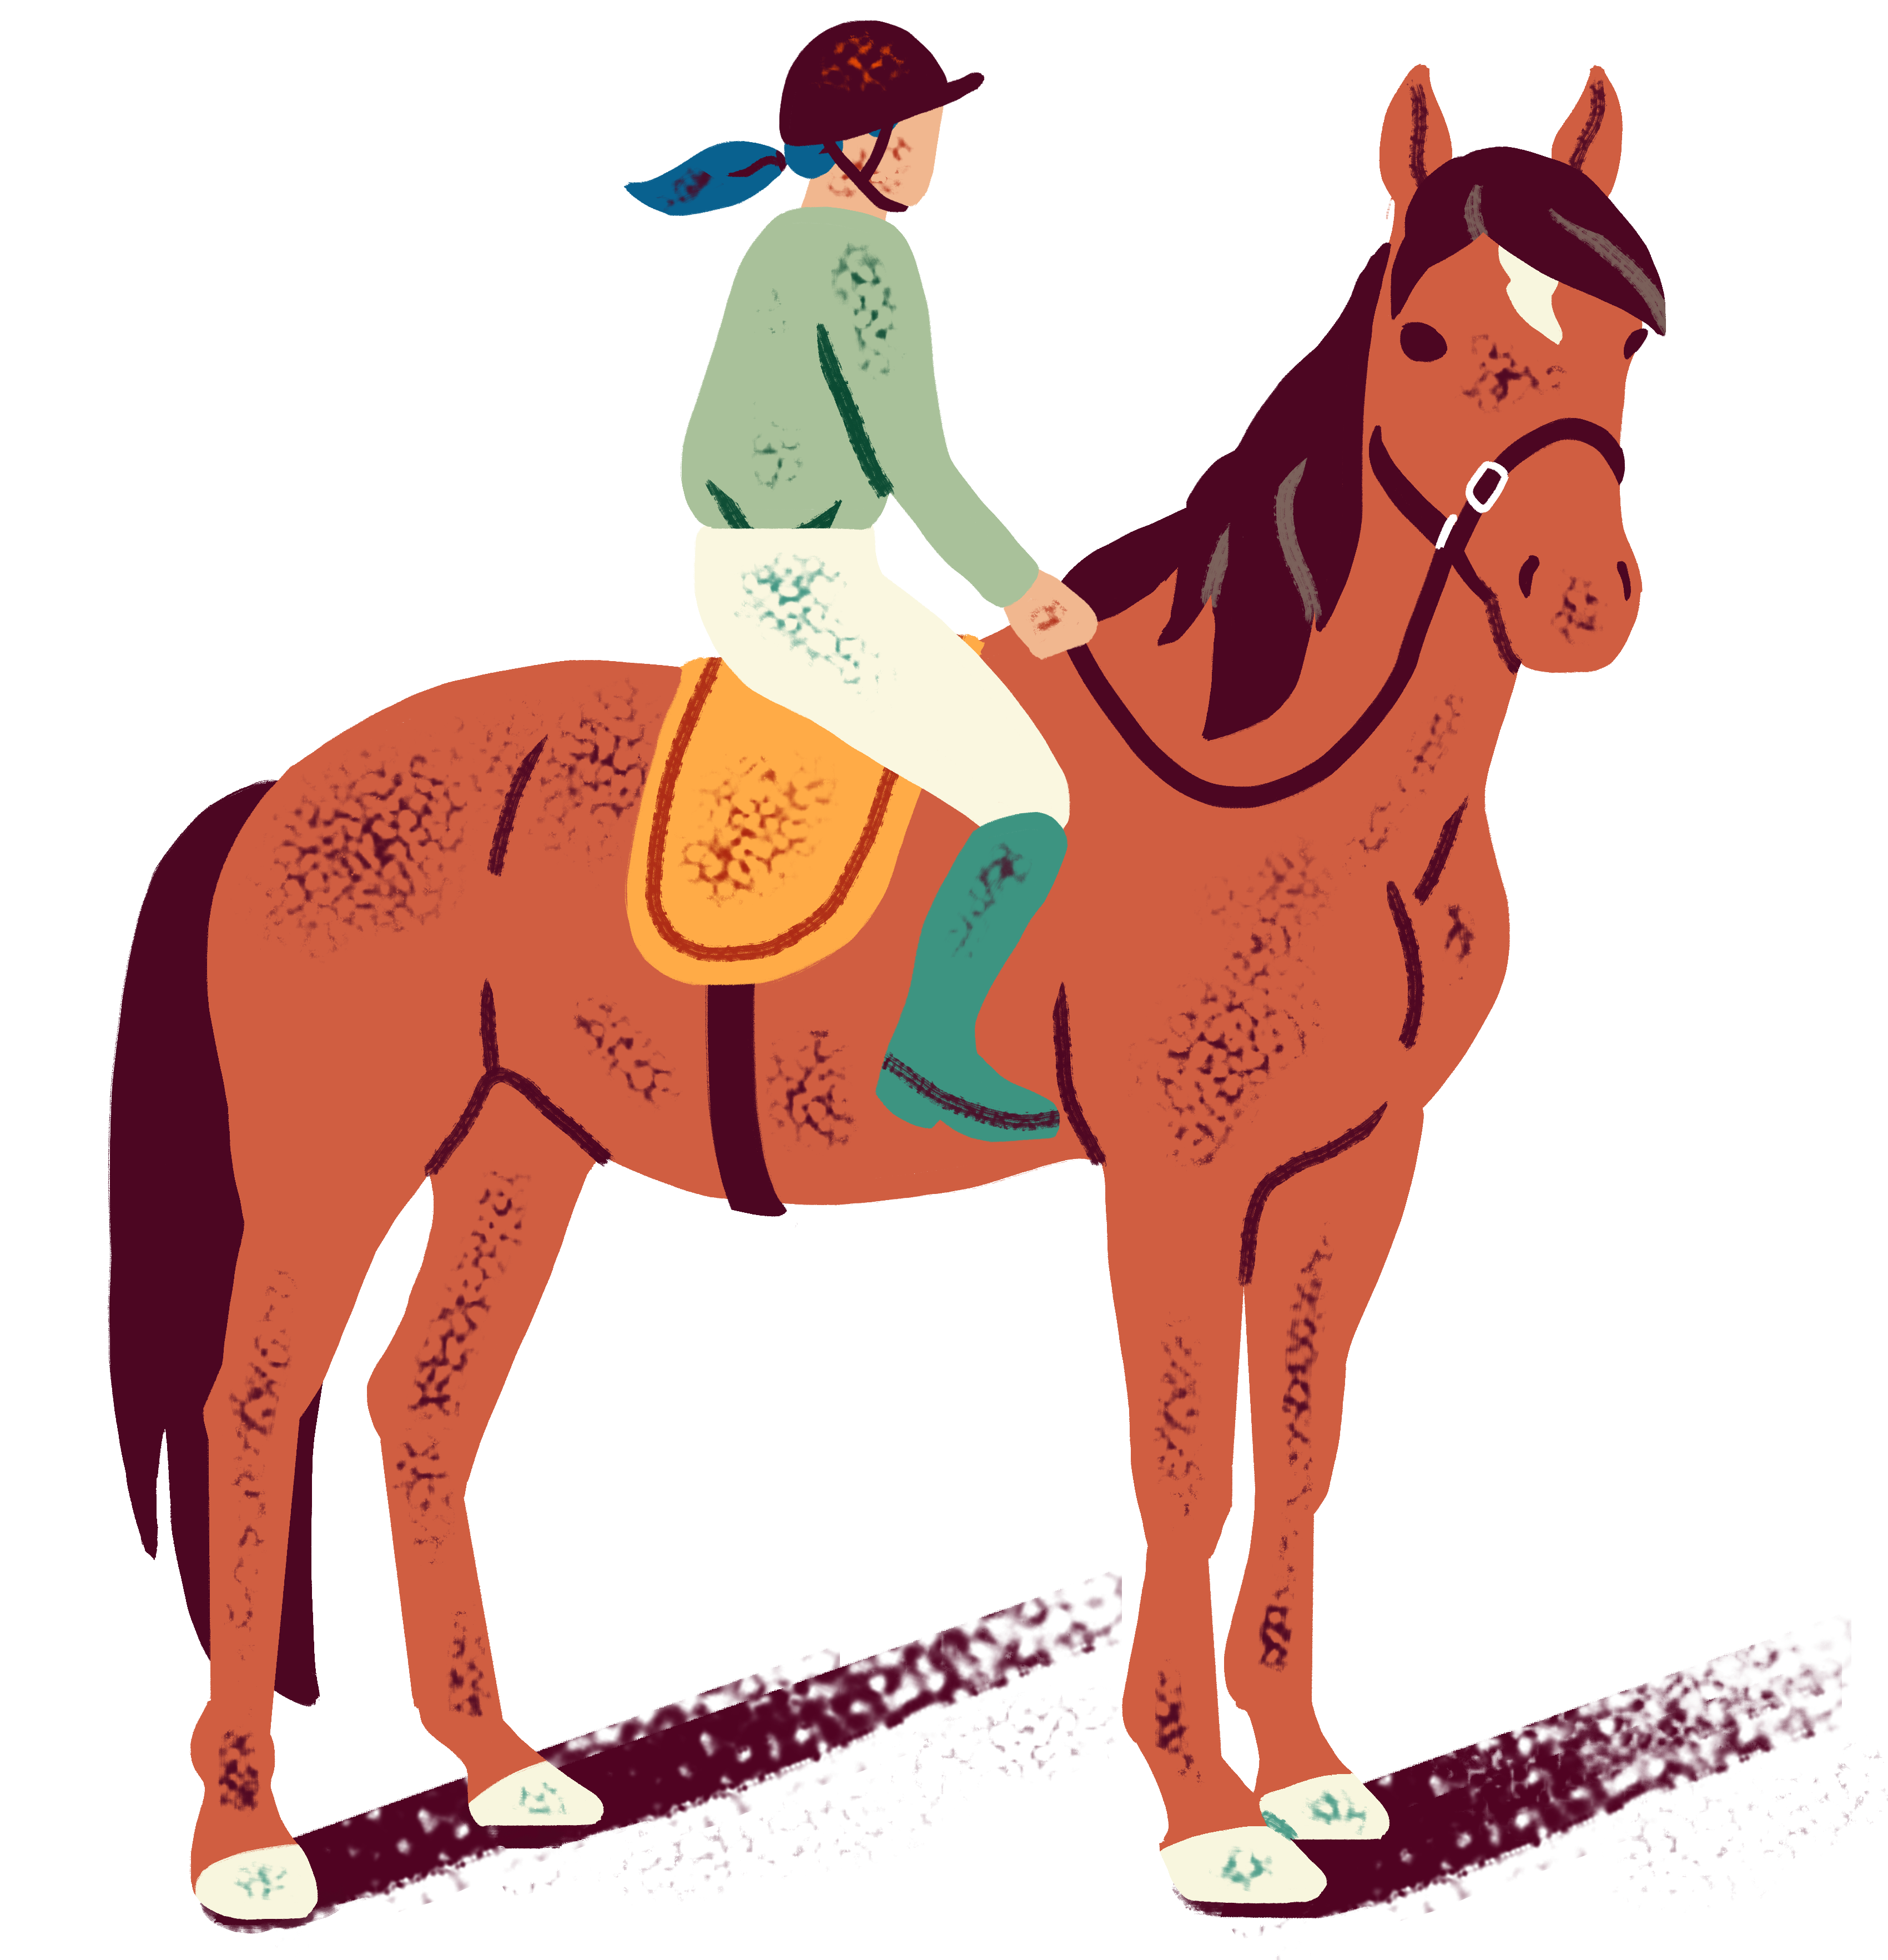 Illustration of a person riding a horse